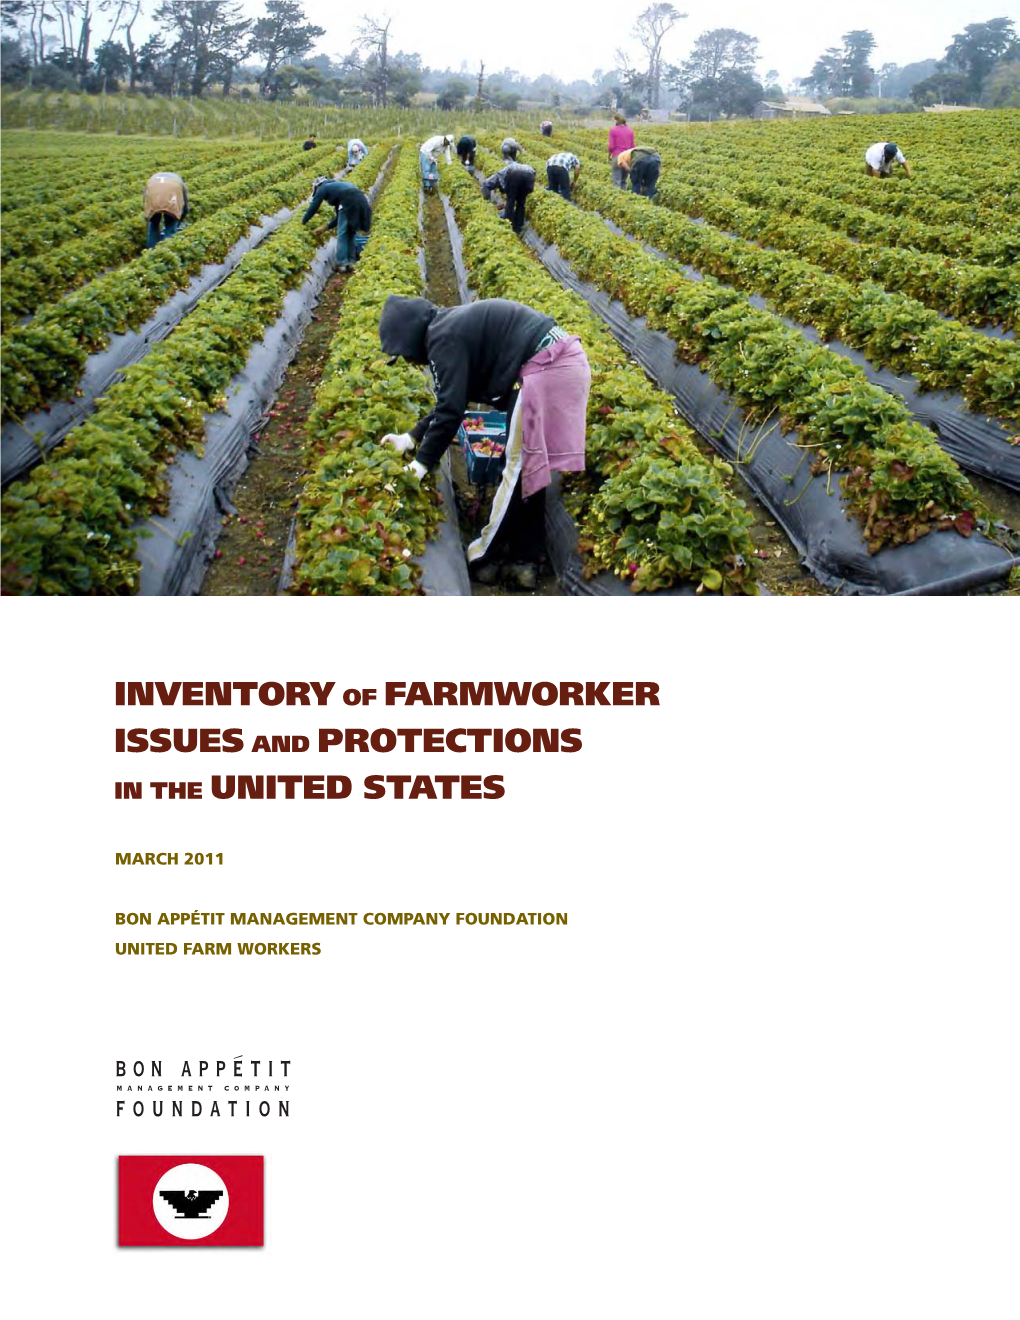 INVENTORY of FARMWORKER ISSUES and PROTECTIONS in the UNITED STATES